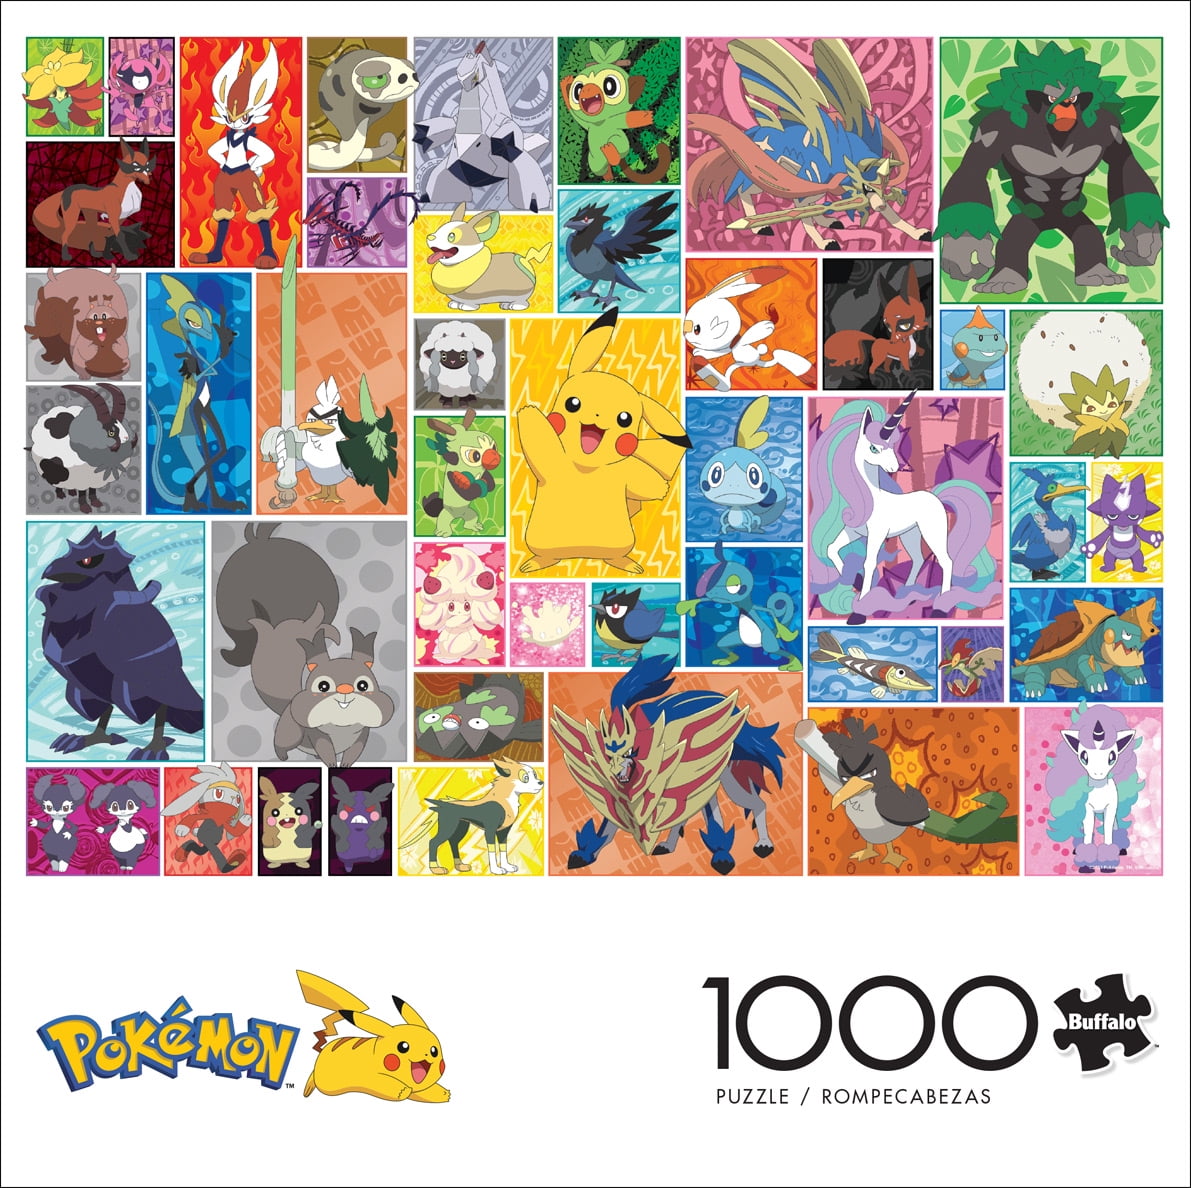 Buffalo Games Pokemon 1000 Piece Jigsaw Puzzle 10600 Fast for sale online 